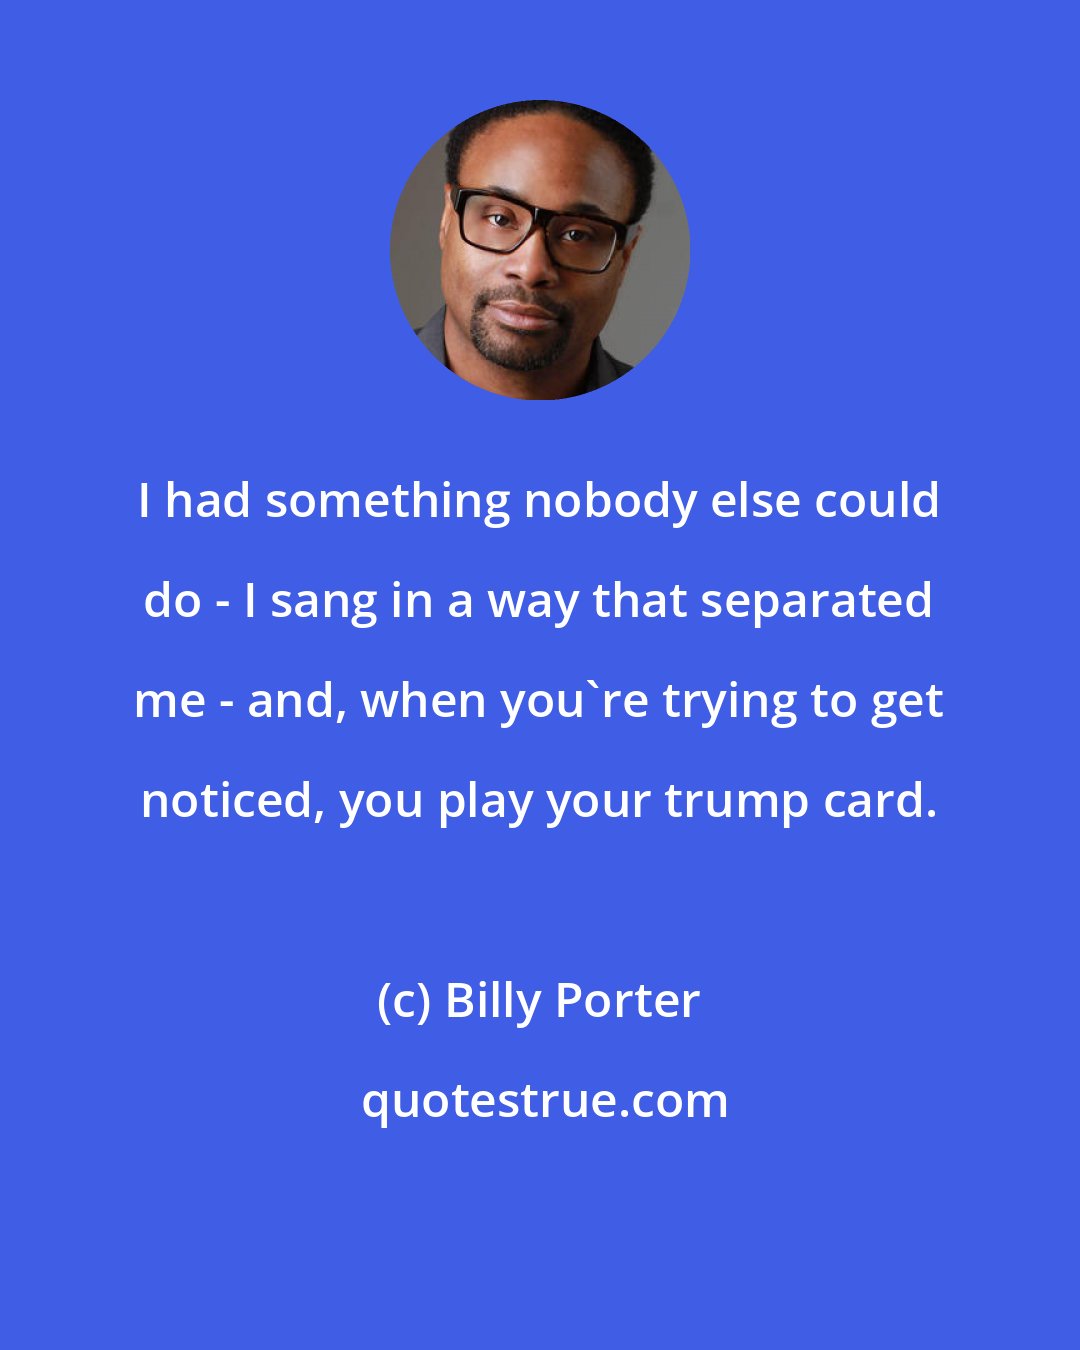 Billy Porter: I had something nobody else could do - I sang in a way that separated me - and, when you're trying to get noticed, you play your trump card.